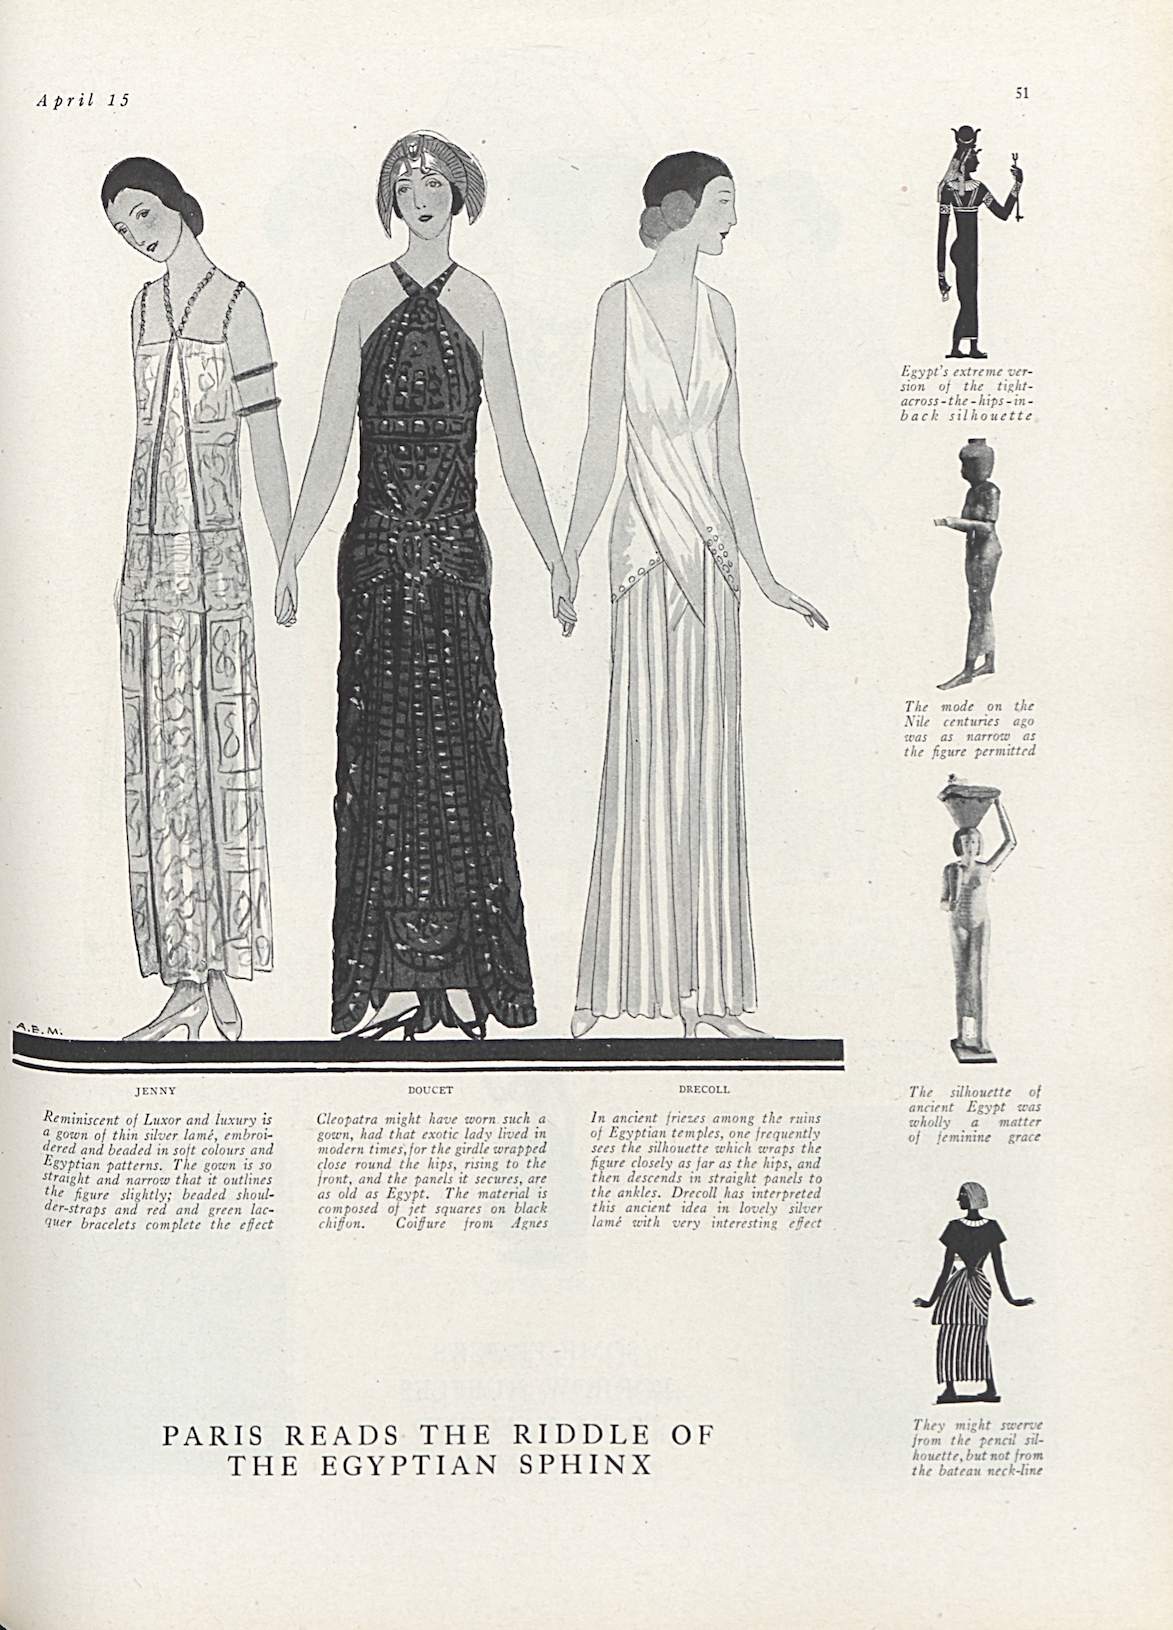 Three large fashion illustrations in the center wearing fashion inspired by Eastern cultures. Four smaller figures on the ledt margins show the orginal source of inspiration, 1923.